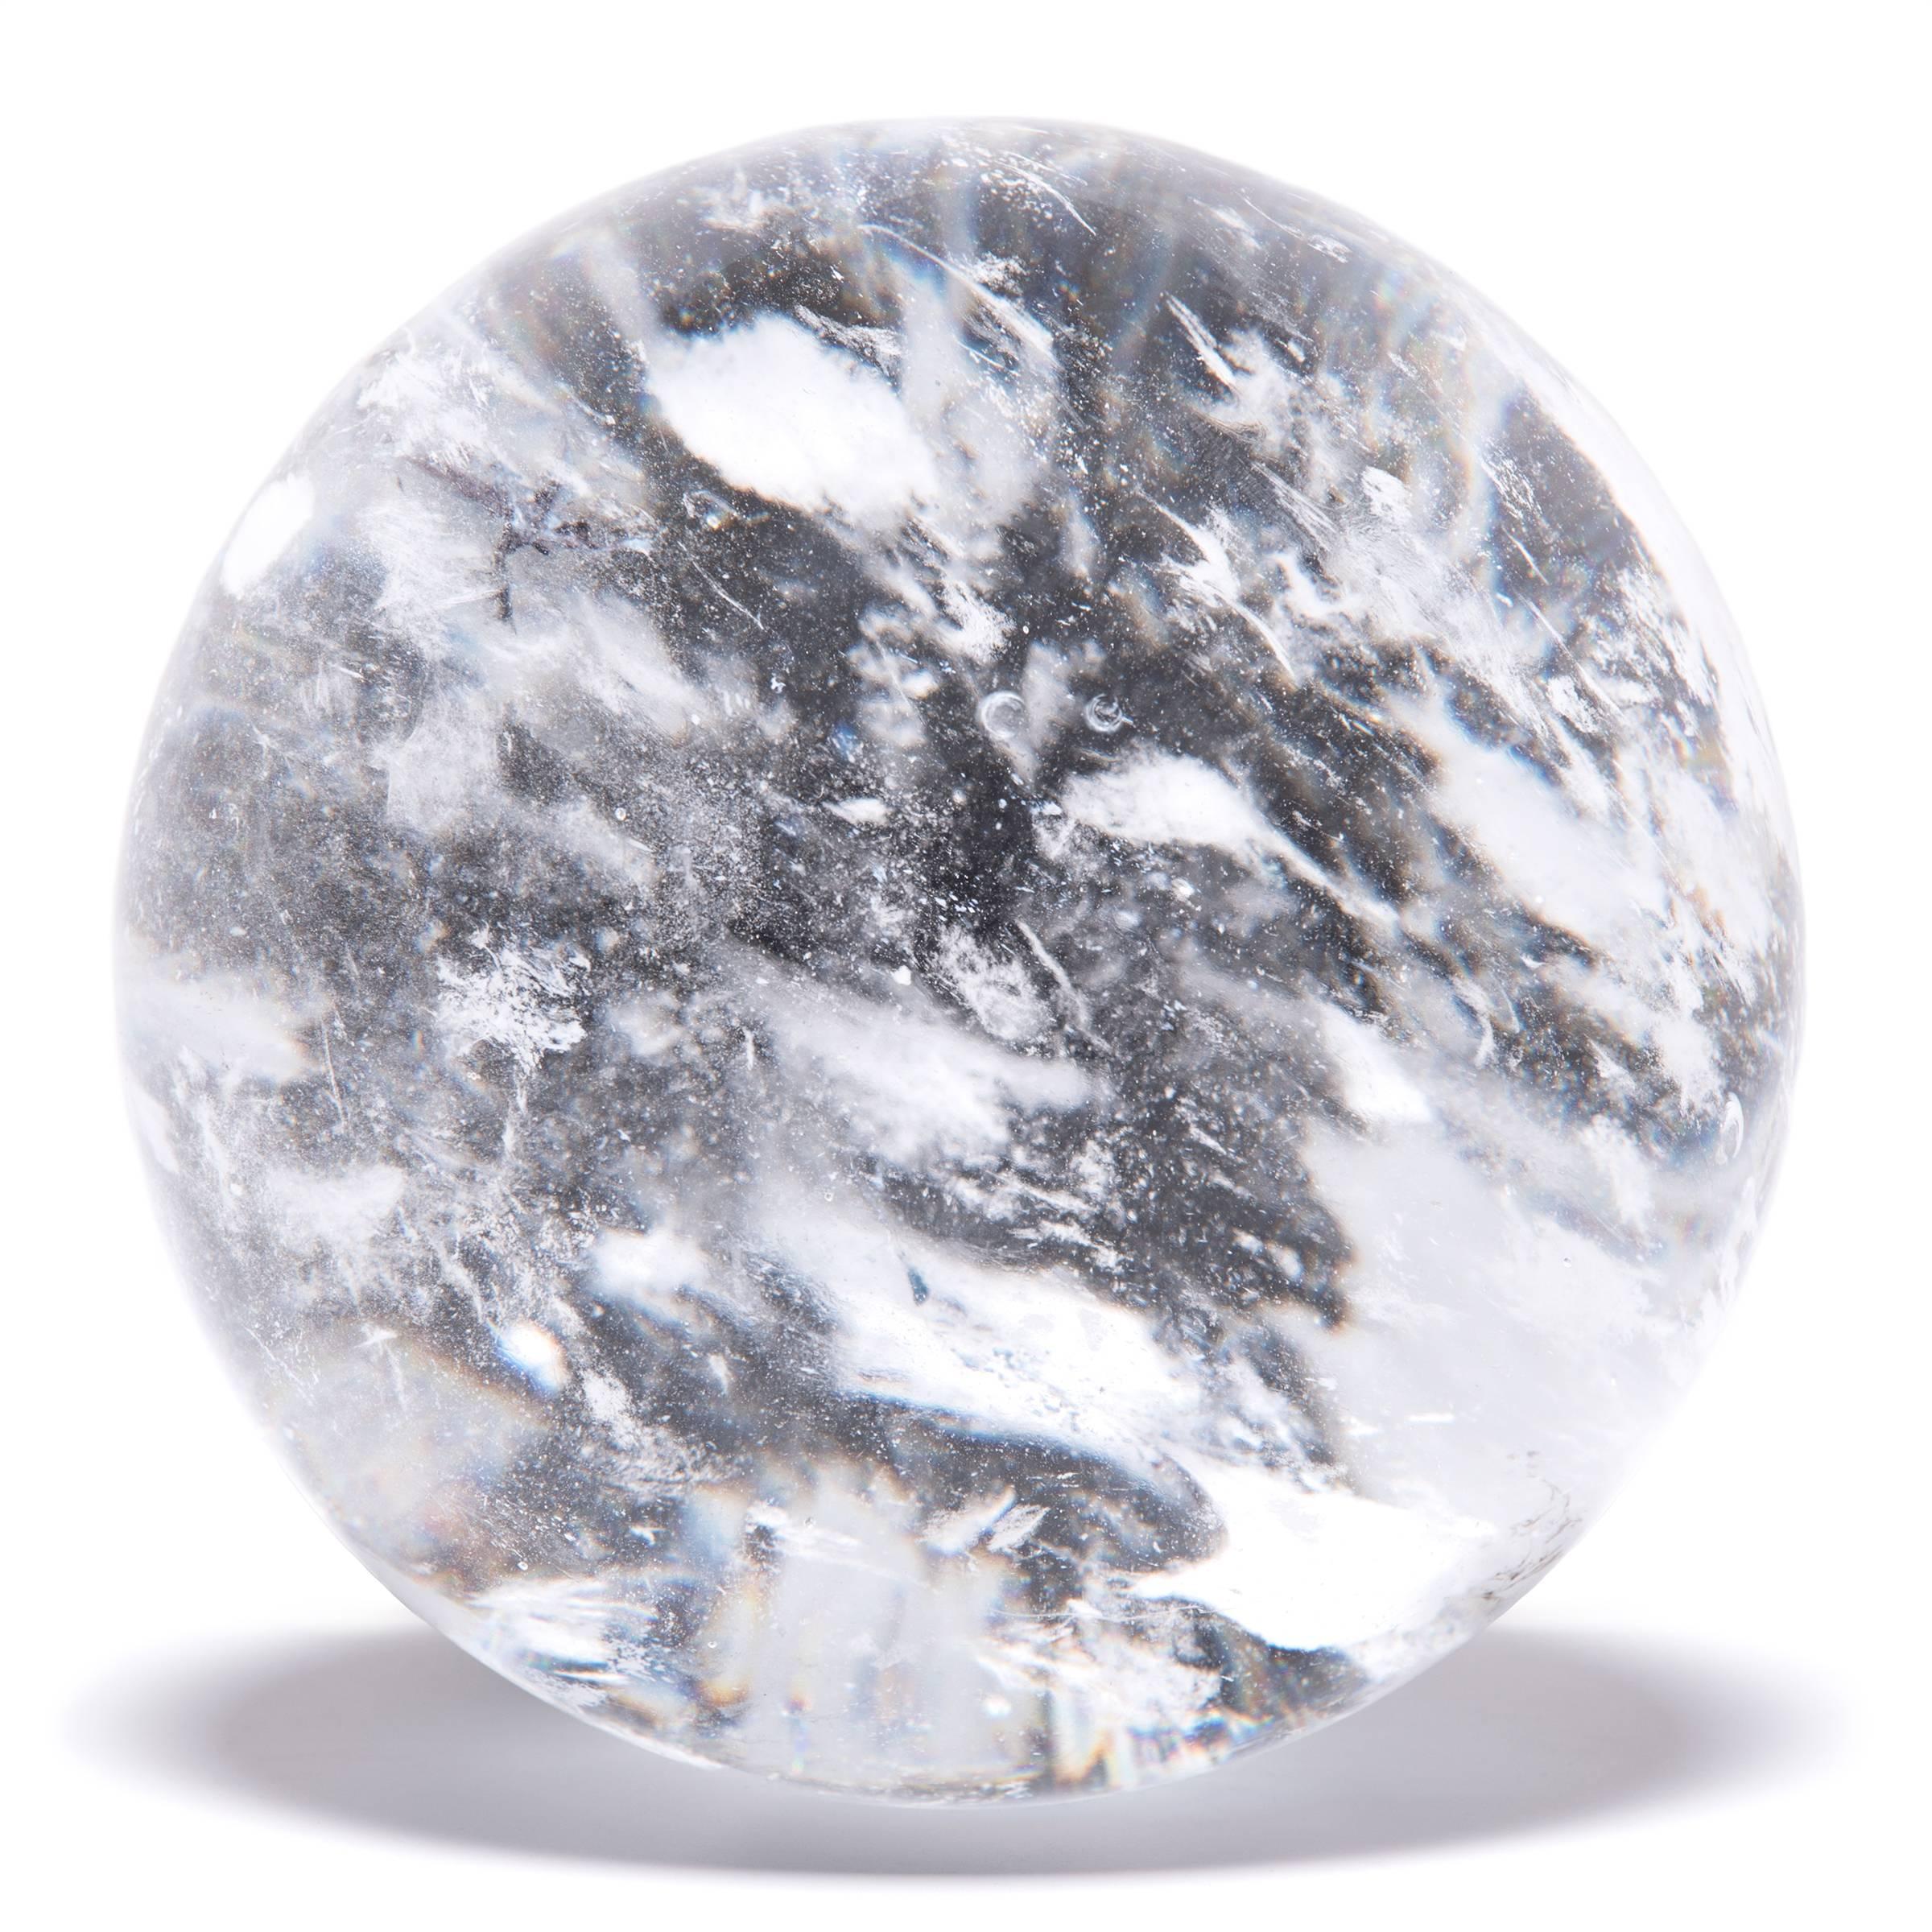 Gem lore is endless, and every culture has its own beliefs about specific stones tied to cultural history, geography, and spiritual practices. In China, some practitioners of feng shui value clear quartz, like this beautiful and substantial crystal